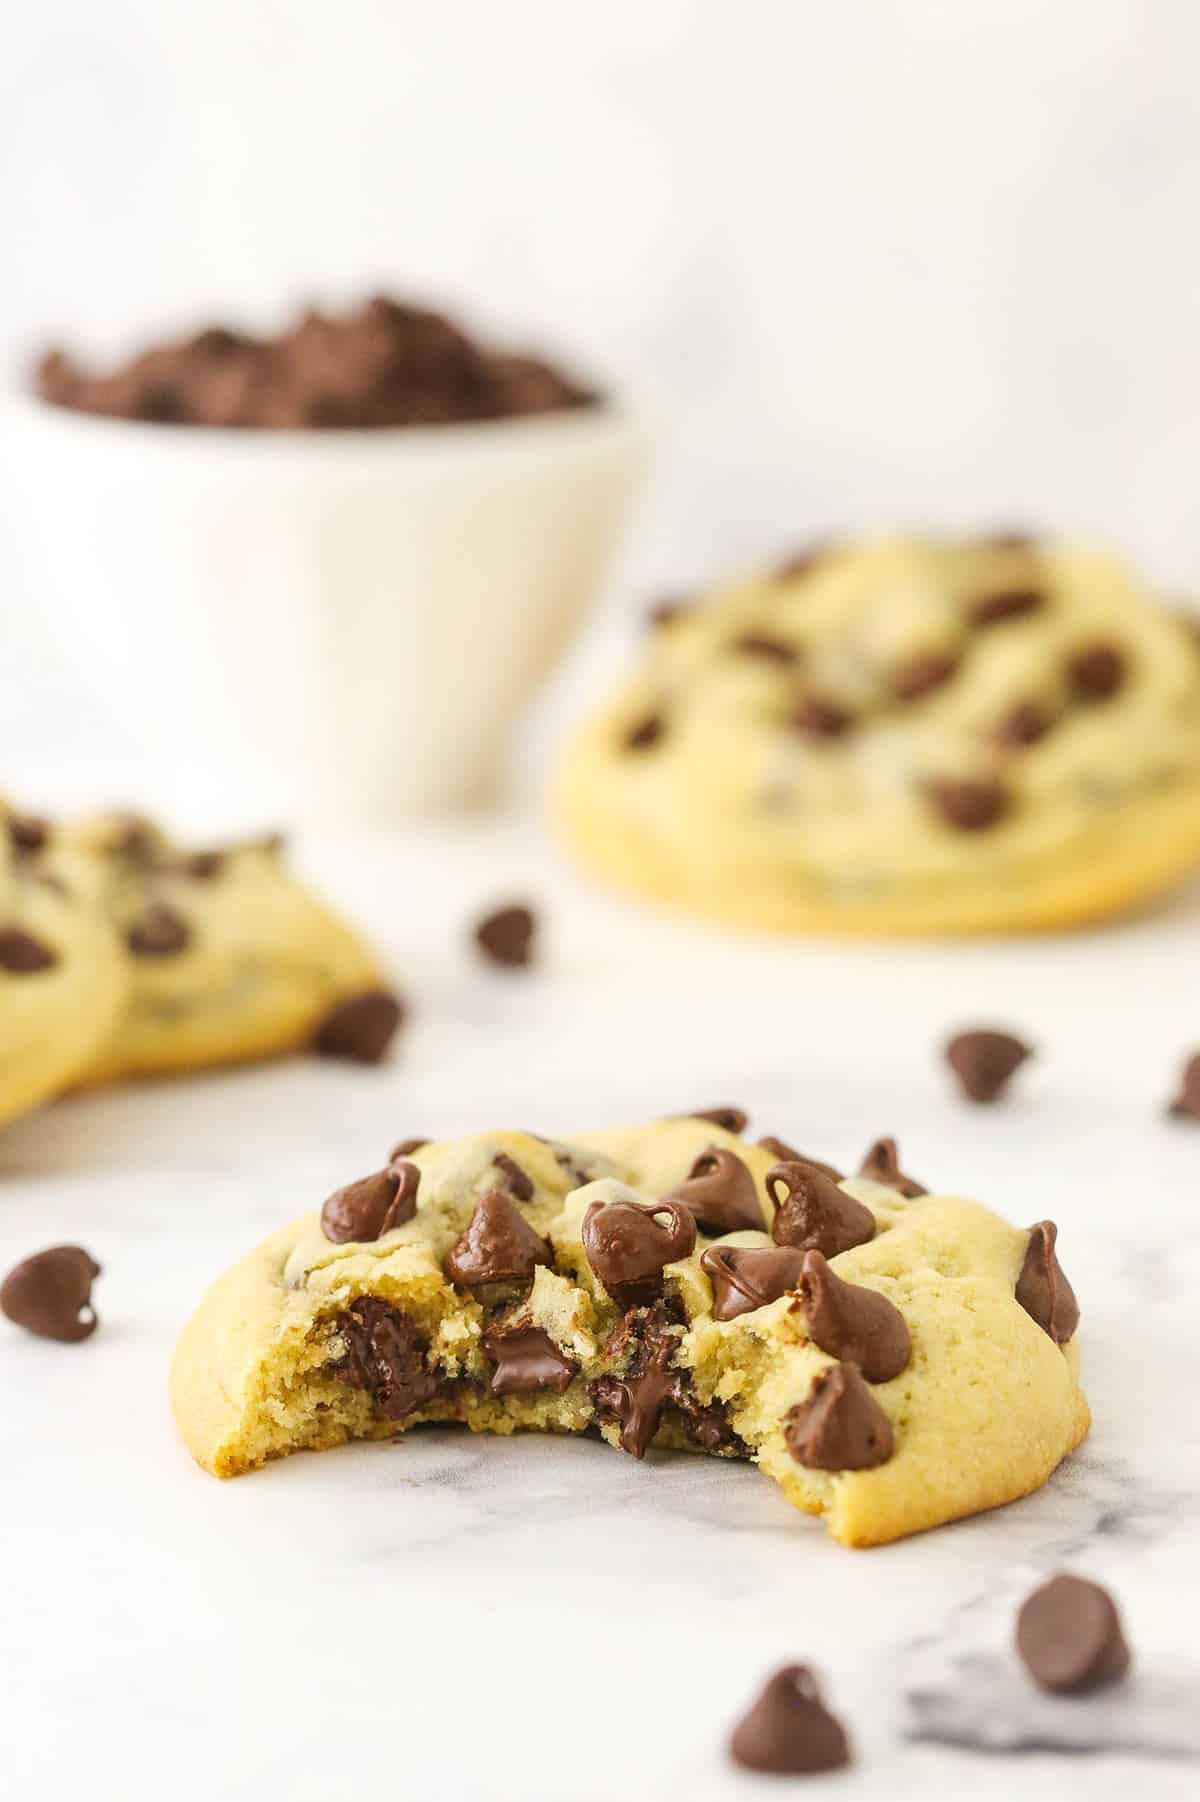 A soft and chewy chocolate chip cookie on a marble kitchen countertop with a big bite taken out of it to reveal a bunch of melty chocolate chips in the center